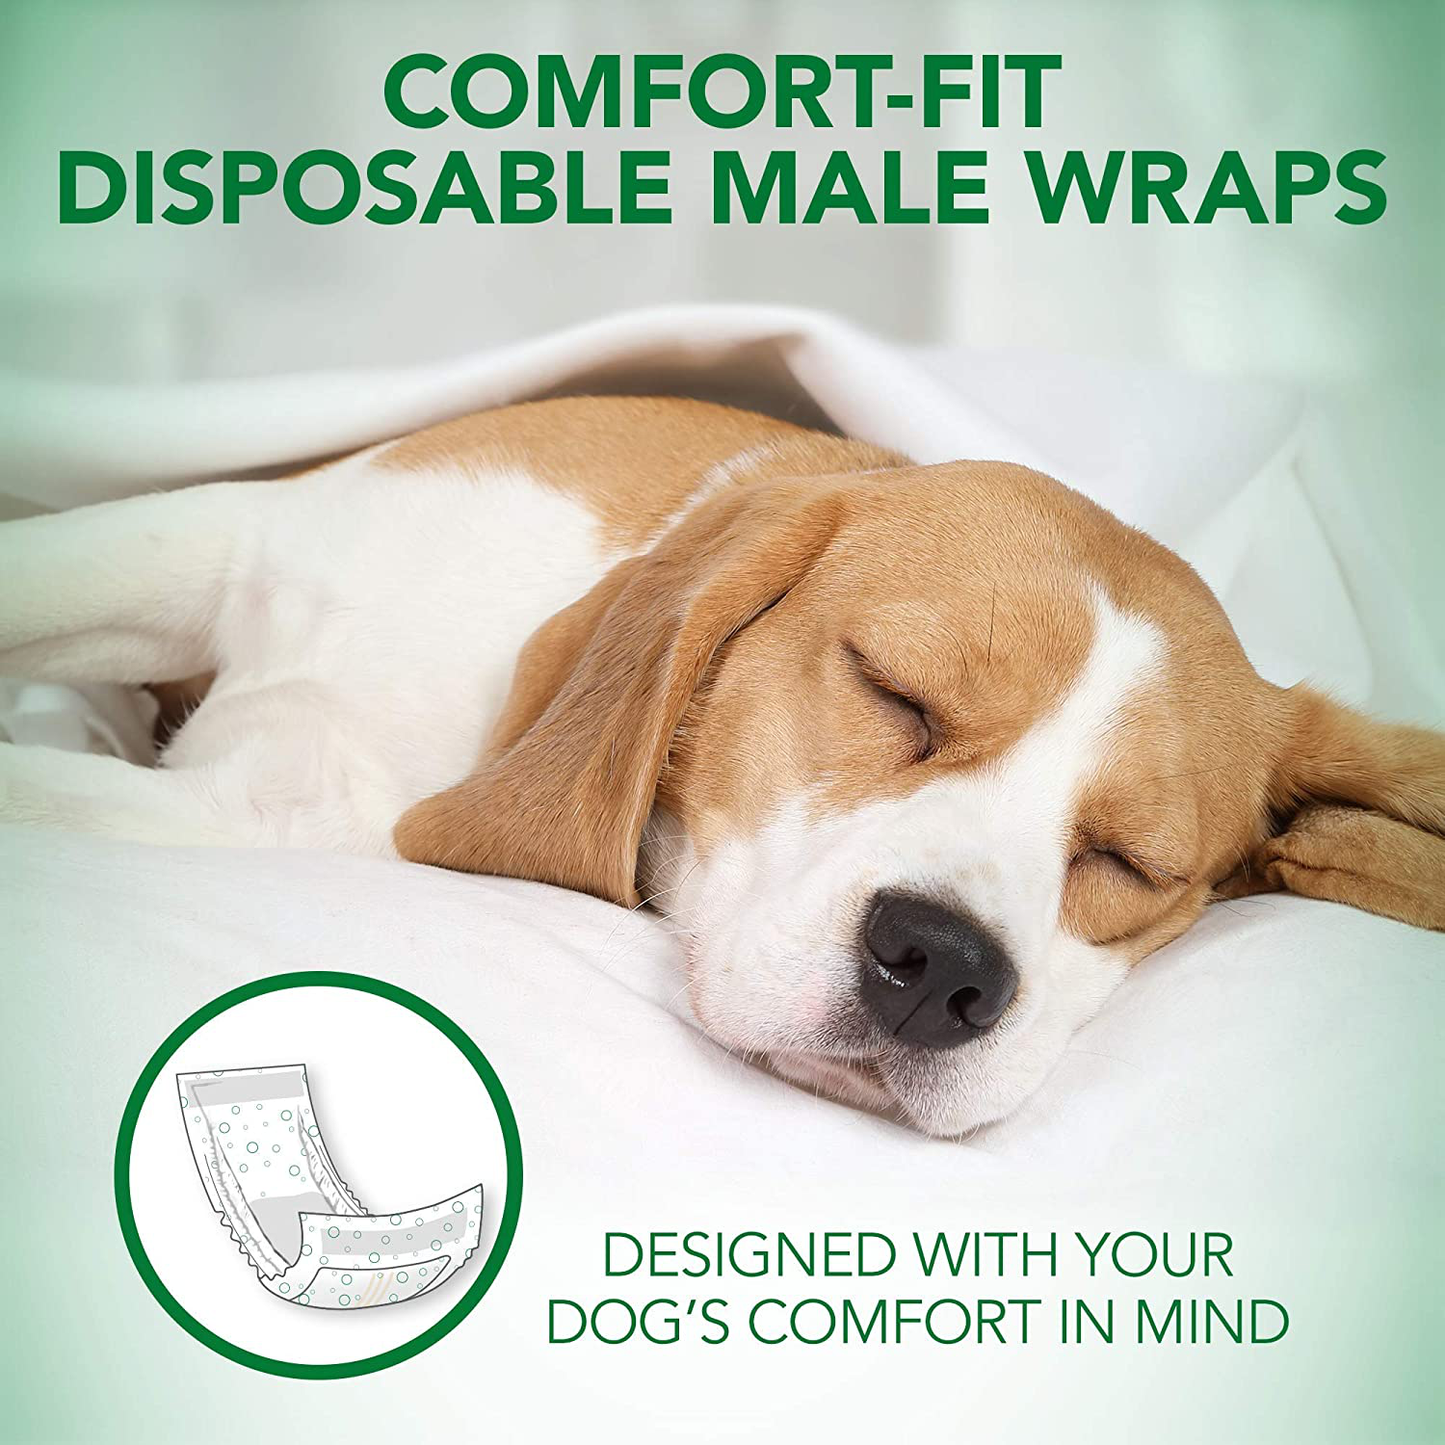 Vet’S Best Comfort Fit Disposable Male Dog Diapers | Absorbent Male Wraps with Leak Proof Fit | Large, 30Count